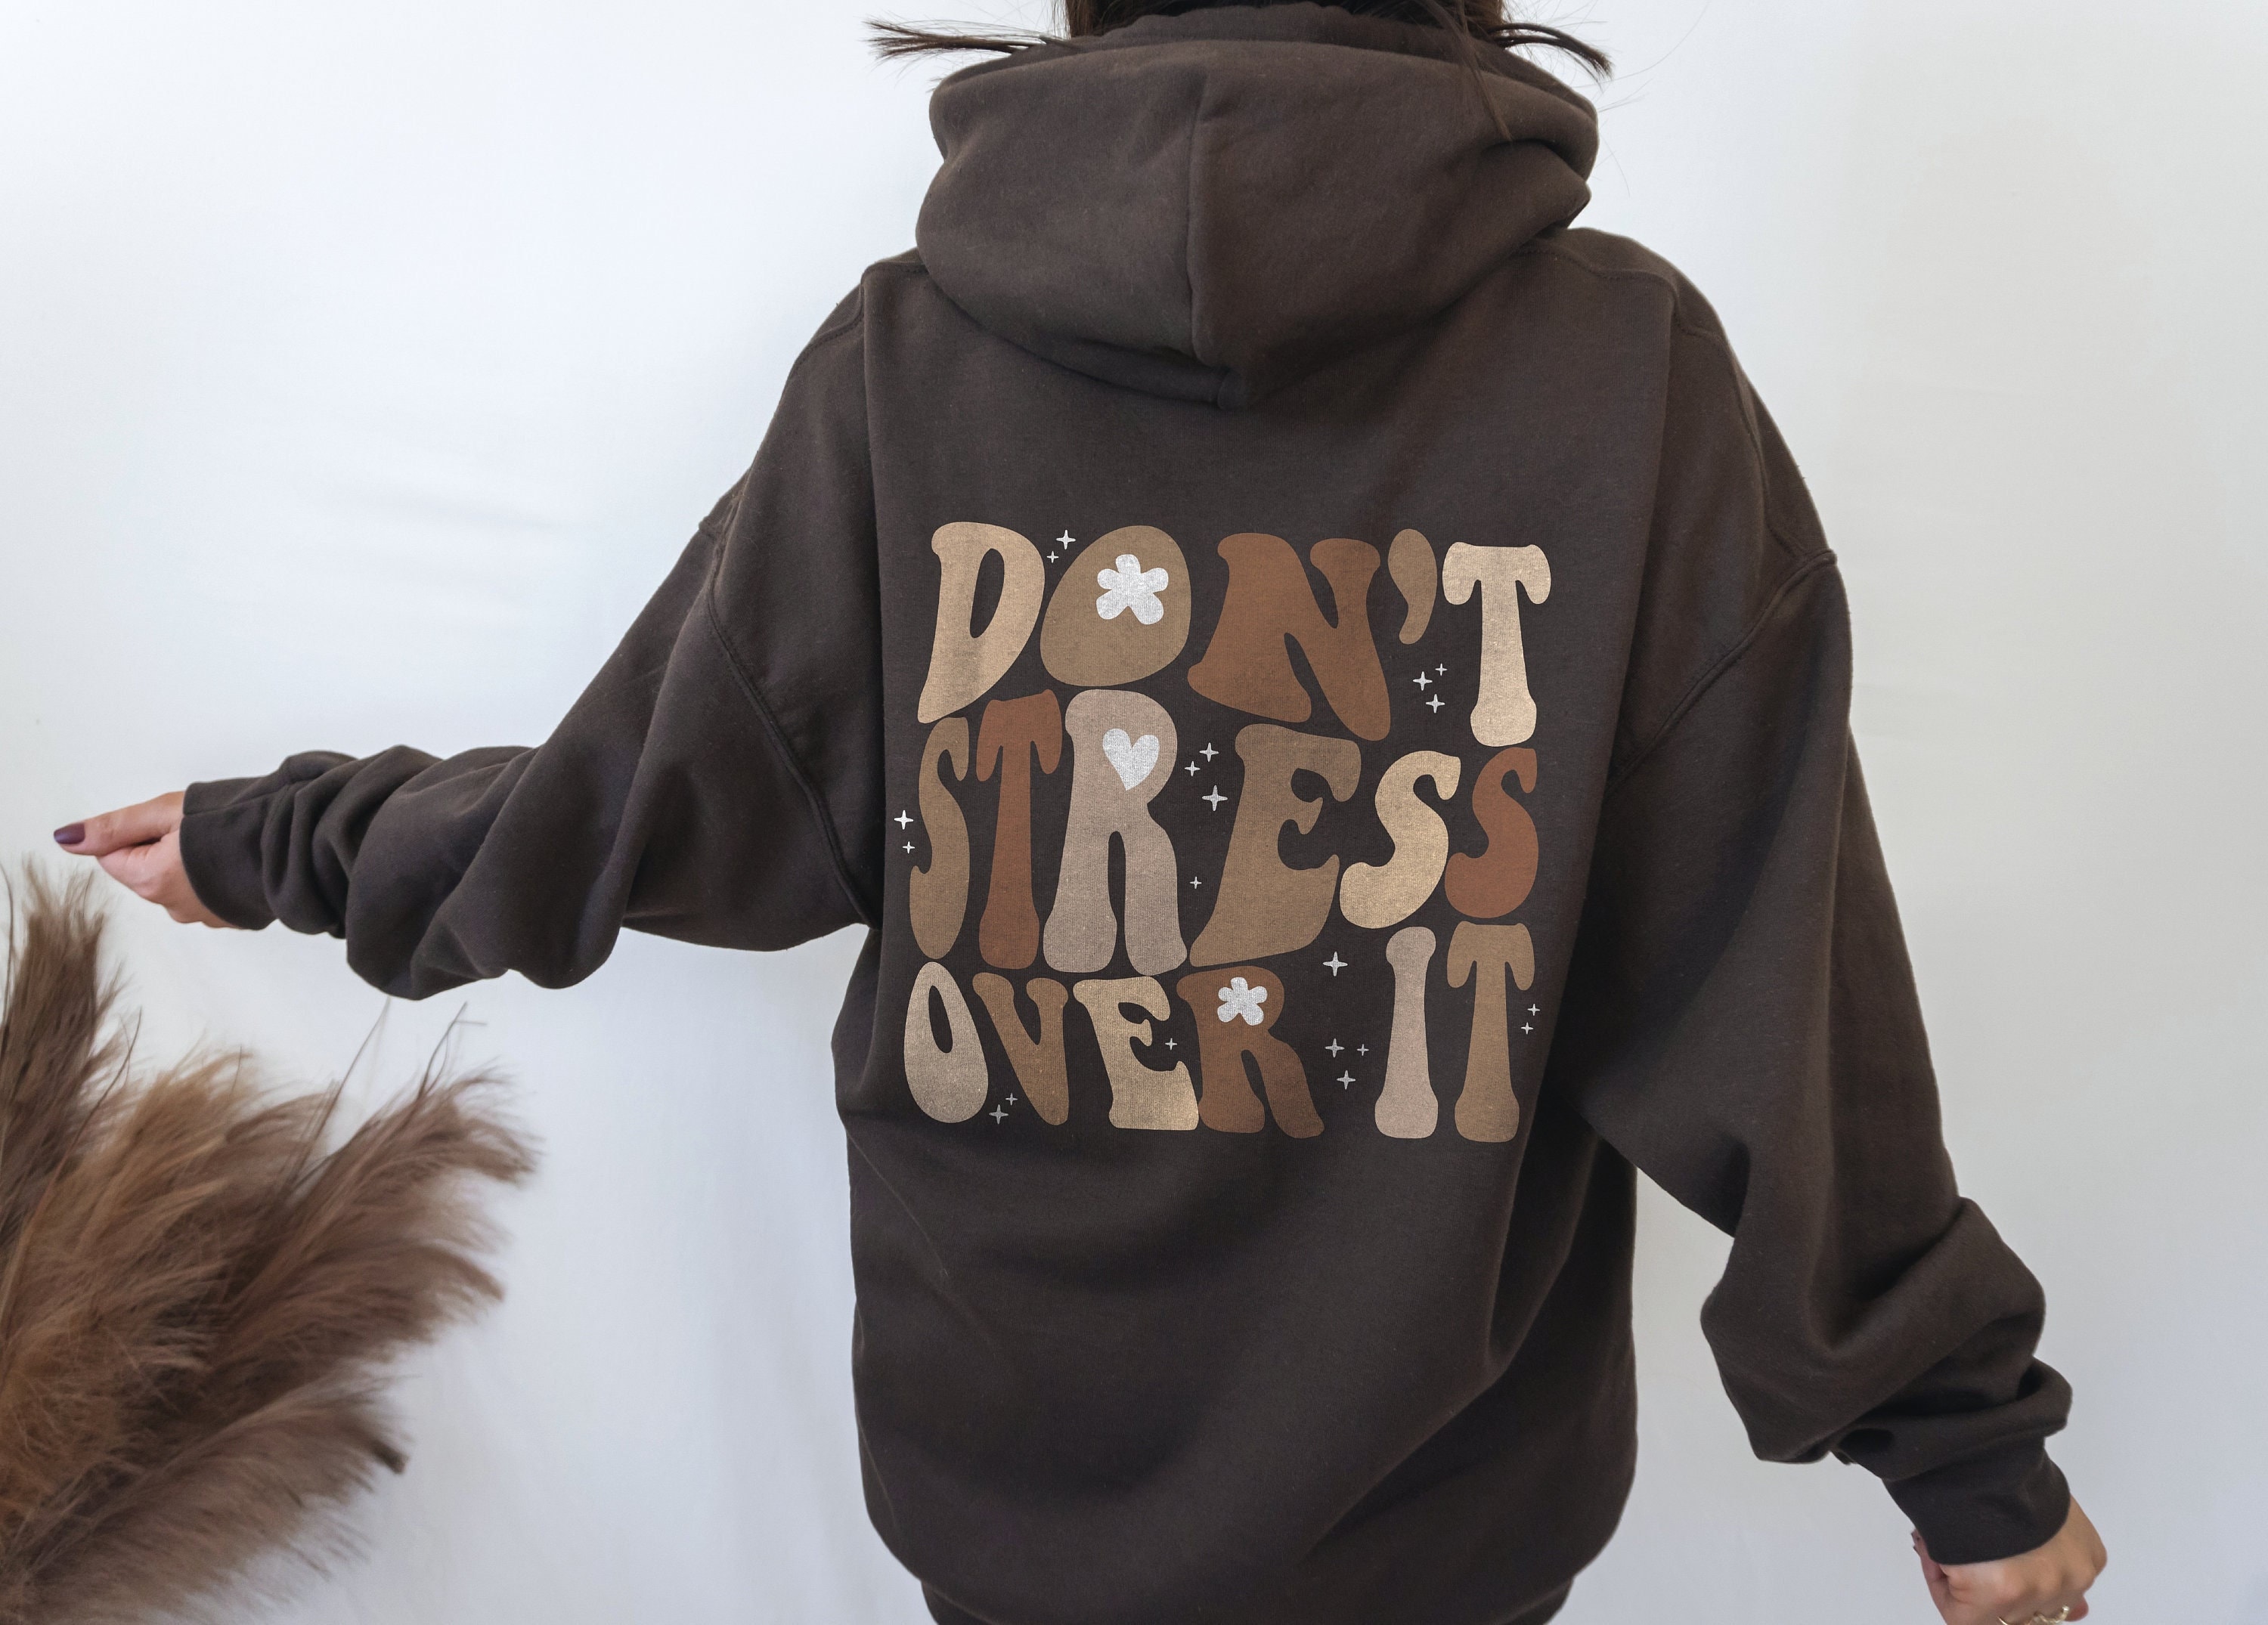 Dont Stress Over It Shirt Trendy Clothes Oversized T Shirt Y2k -  Norway